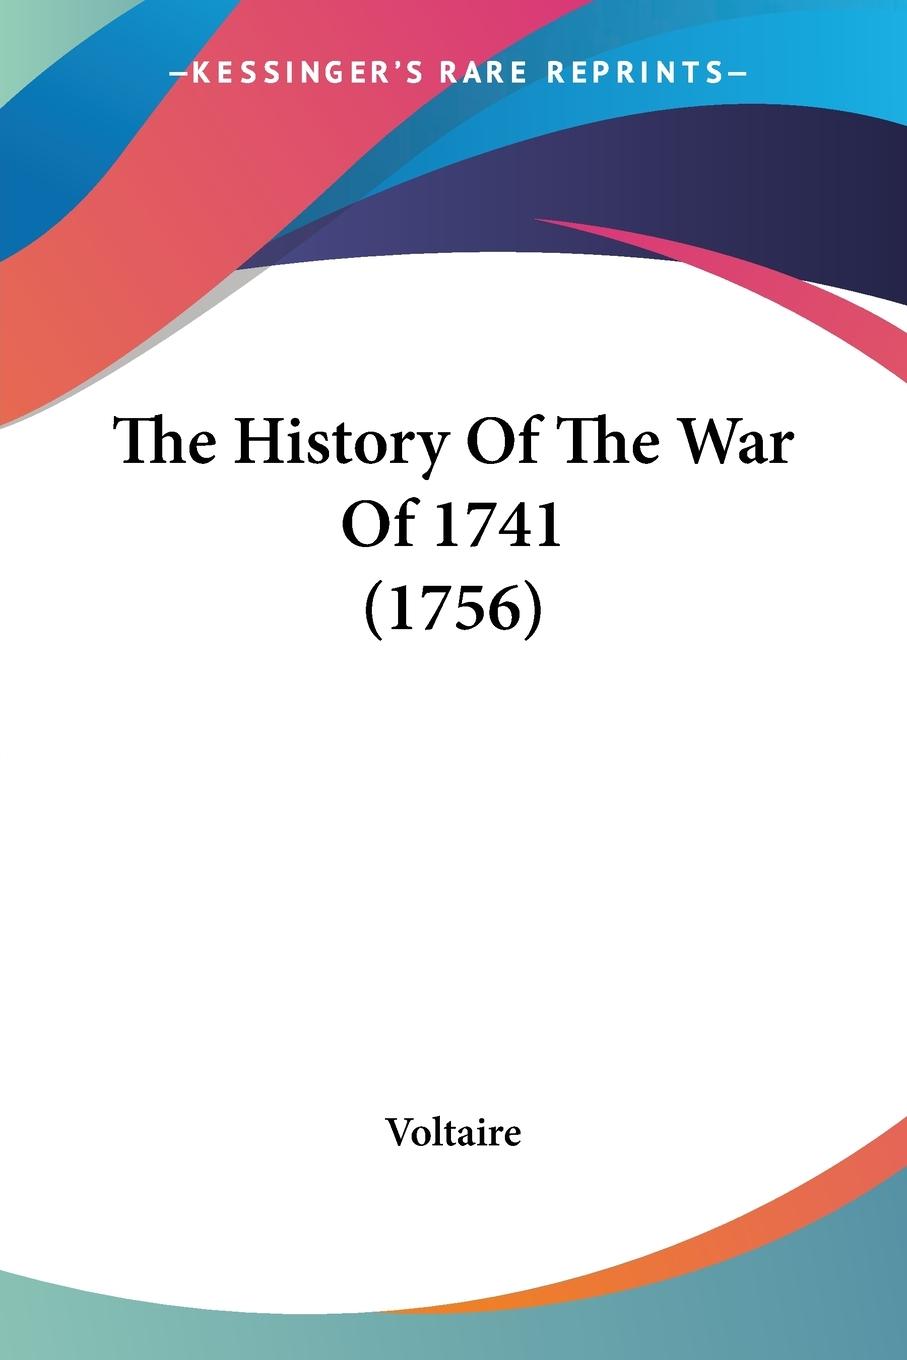 The History Of The War Of 1741 (1756) - Voltaire